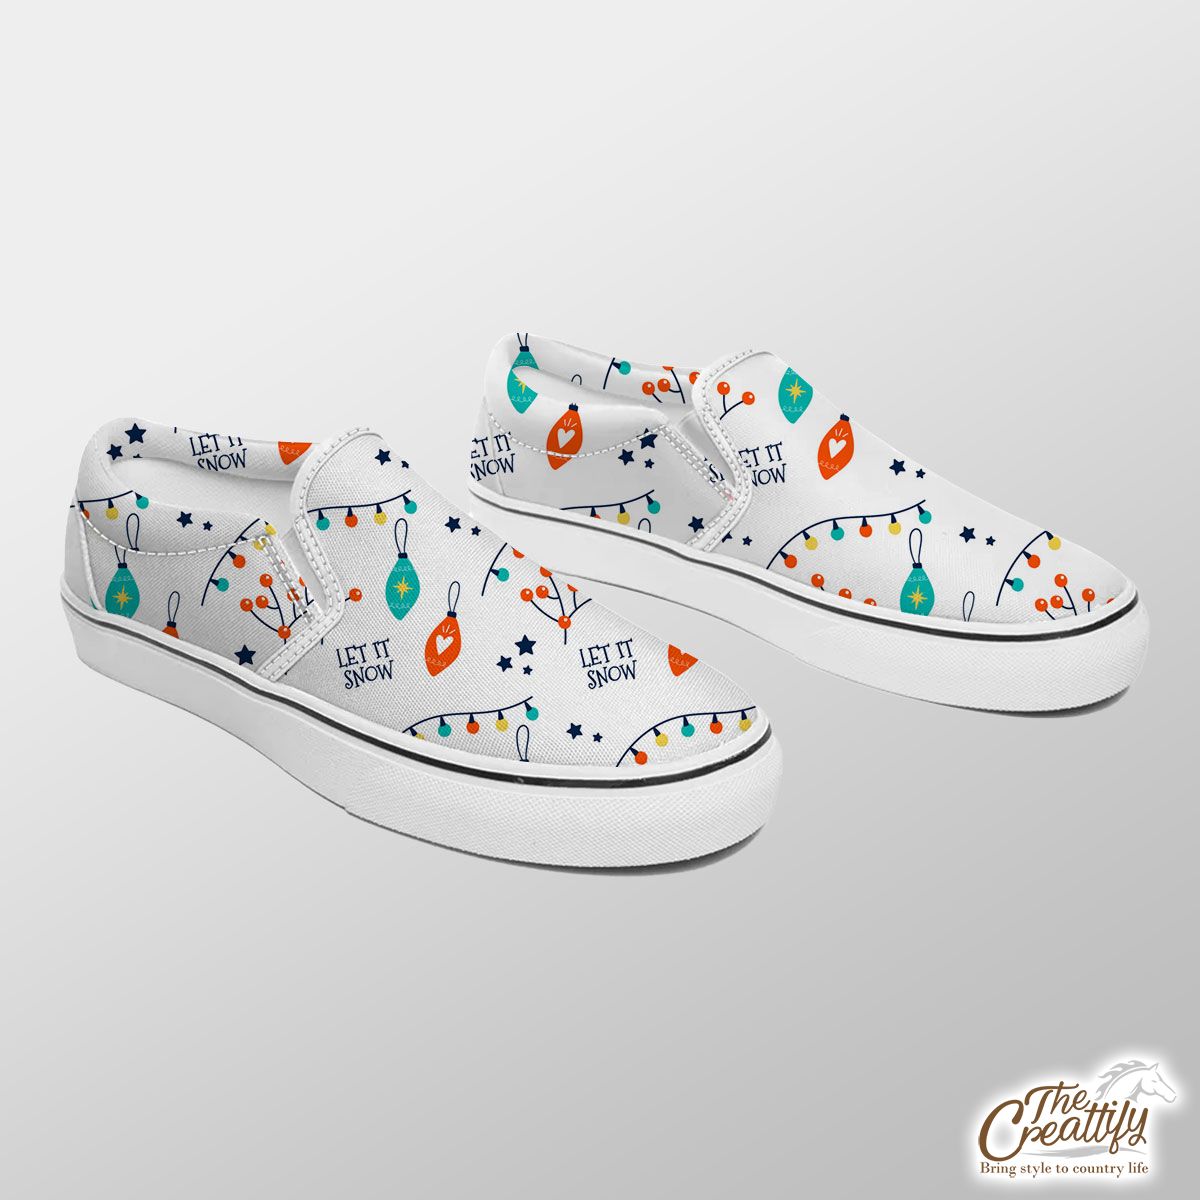 Christmas Lights And Baubles Pattern Slip On Sneakers